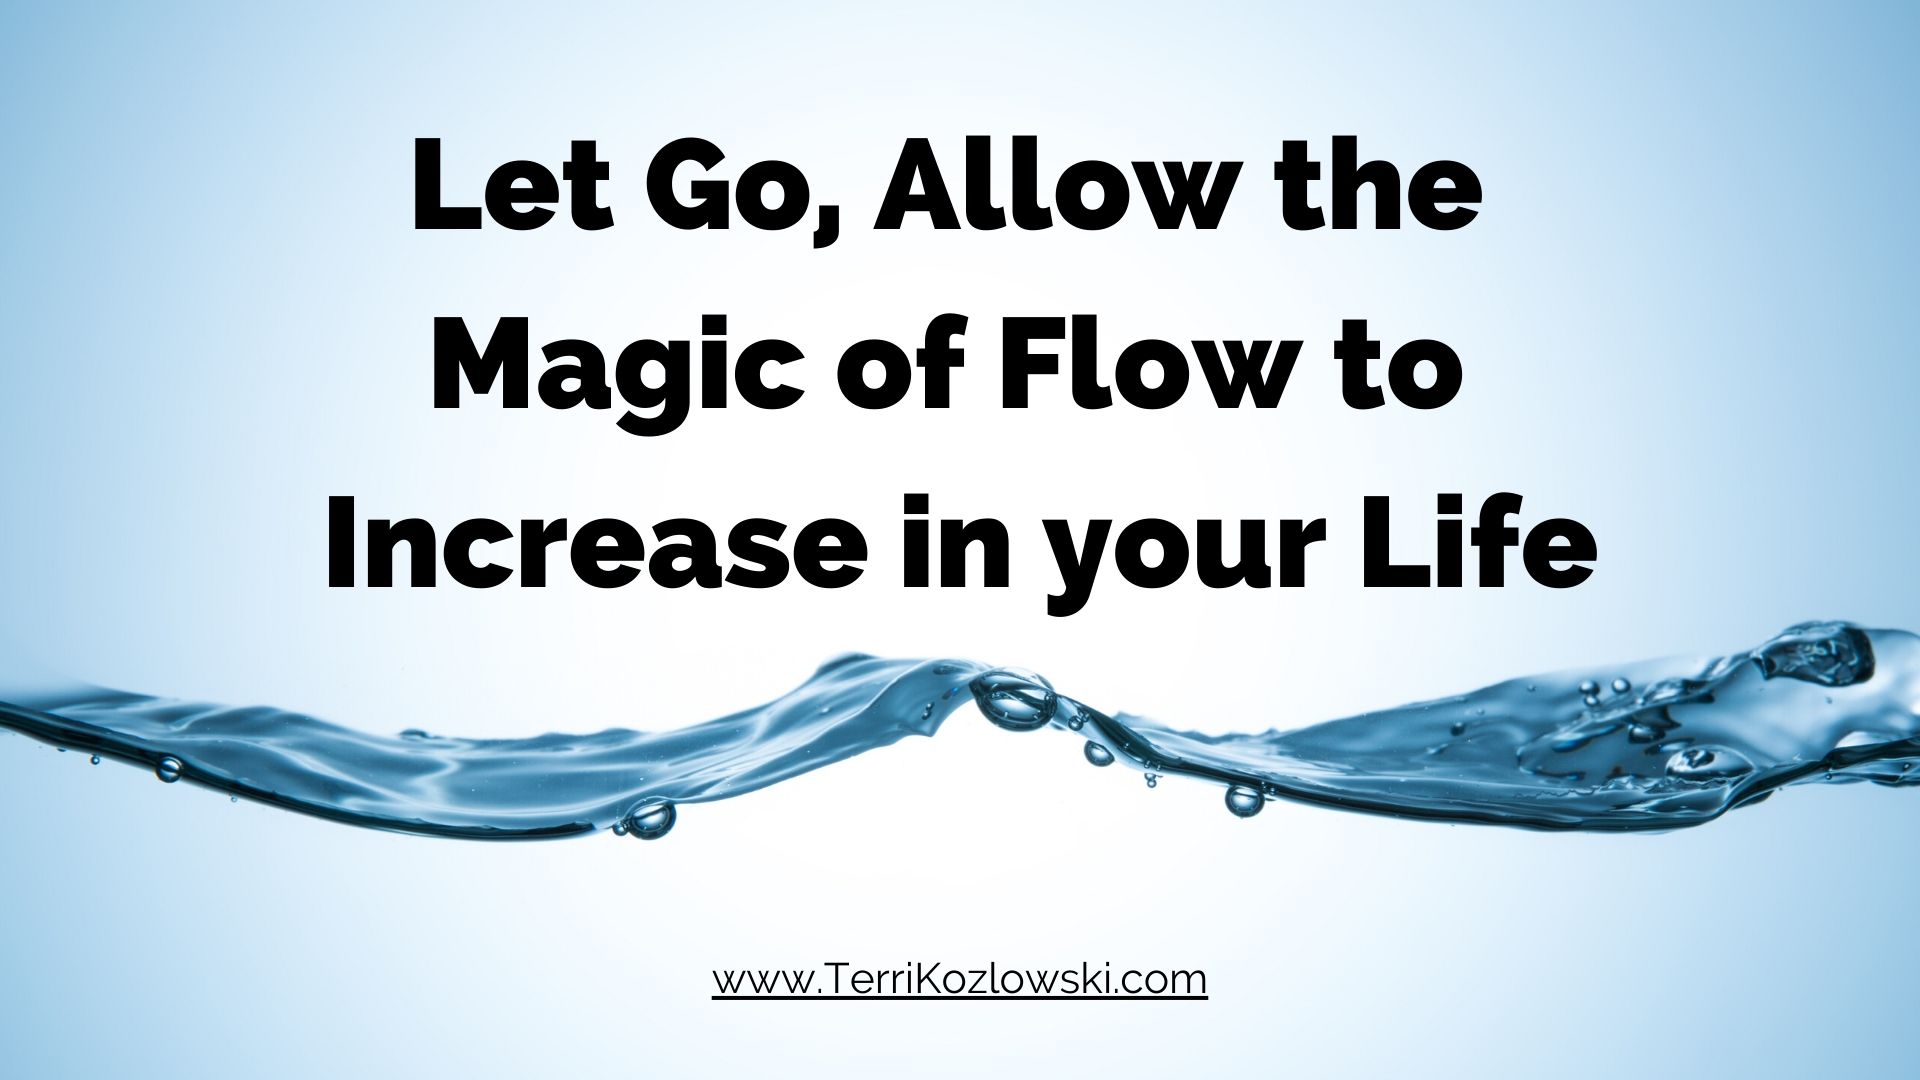 Let Go, Allow the Magic of Flow to Increase in your Life